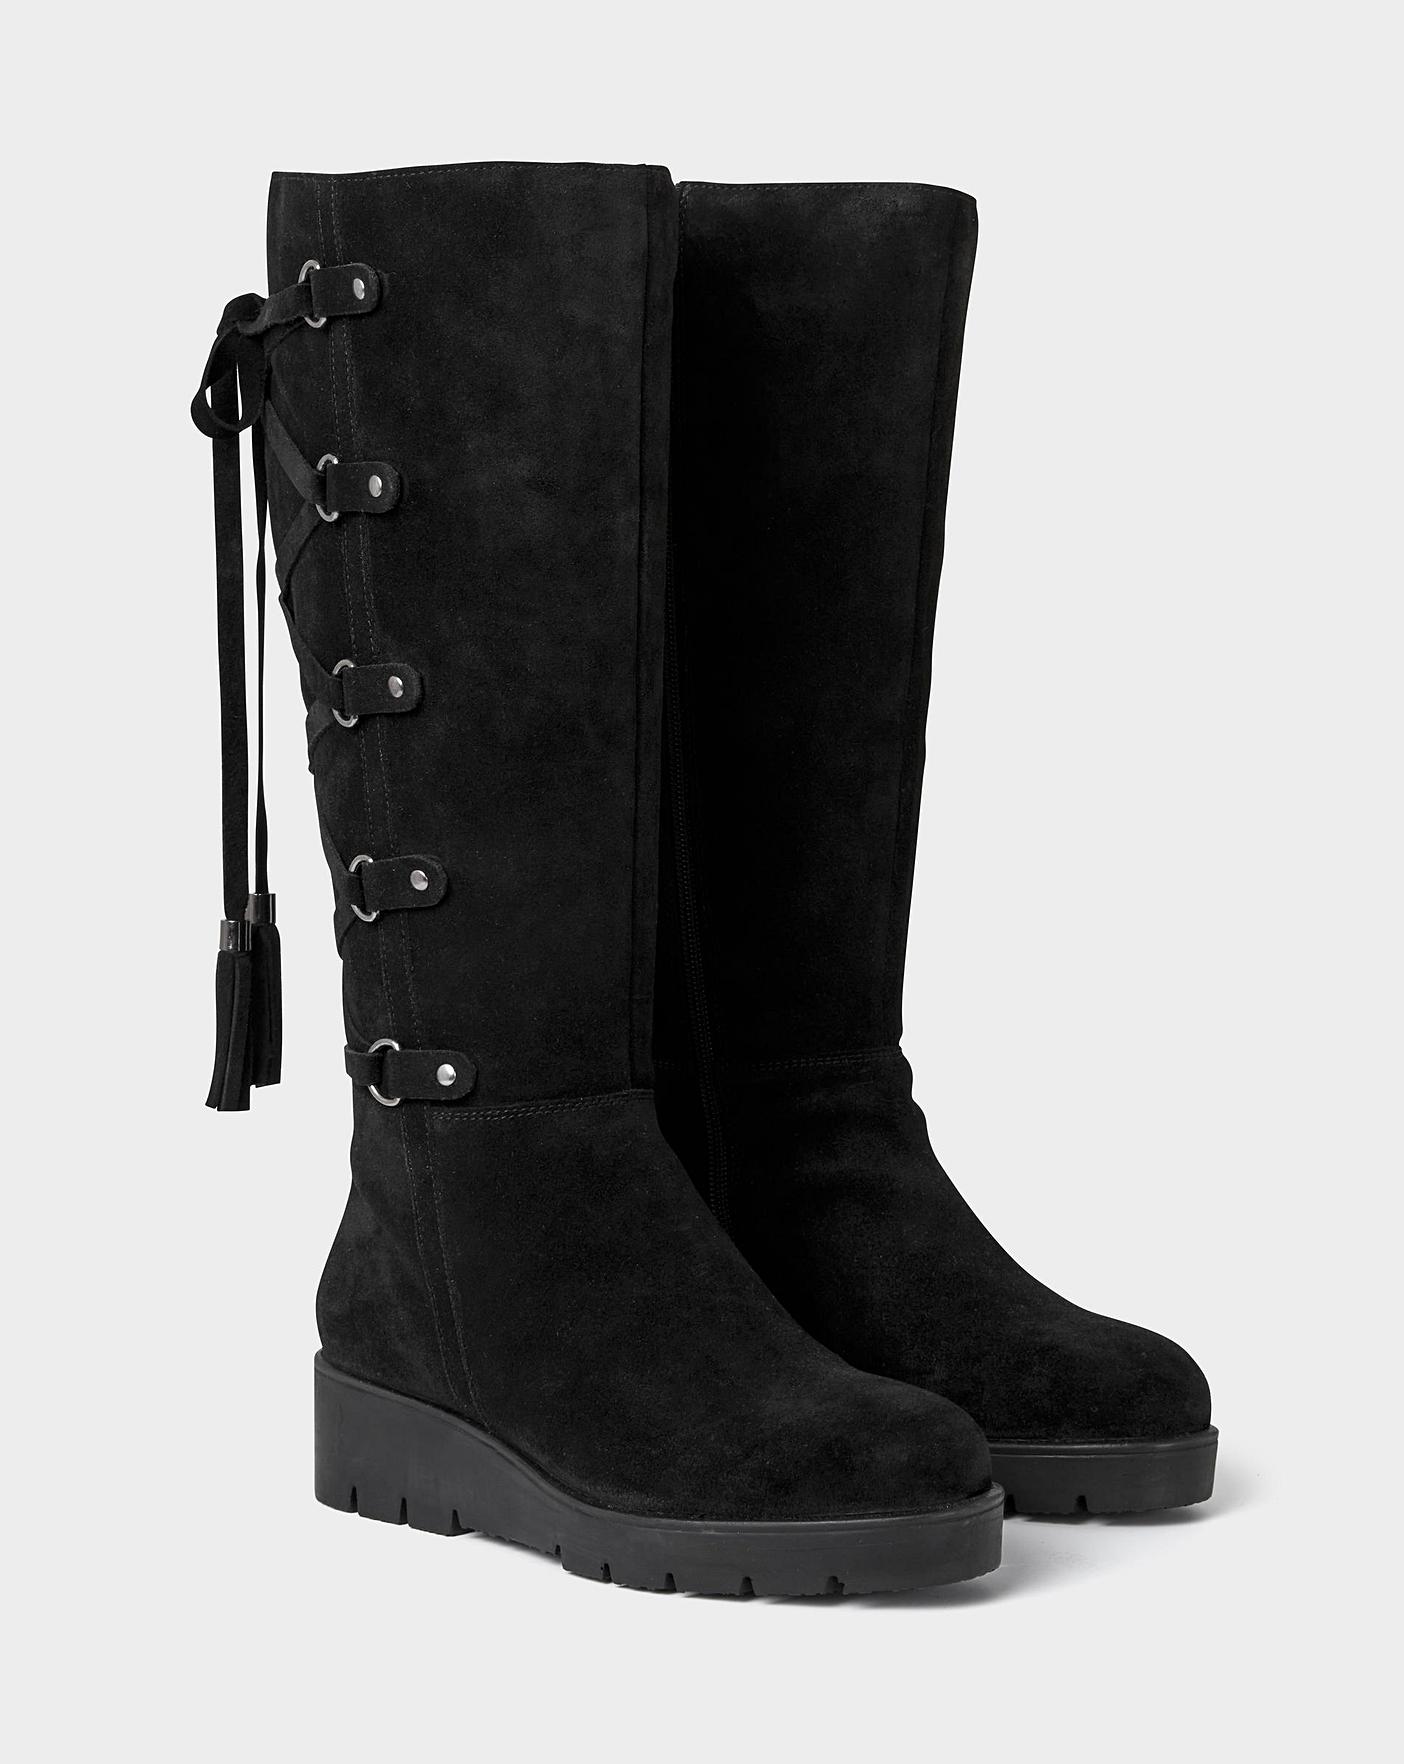 Joe Browns Suede Lace Up Boots EEE | Marisota